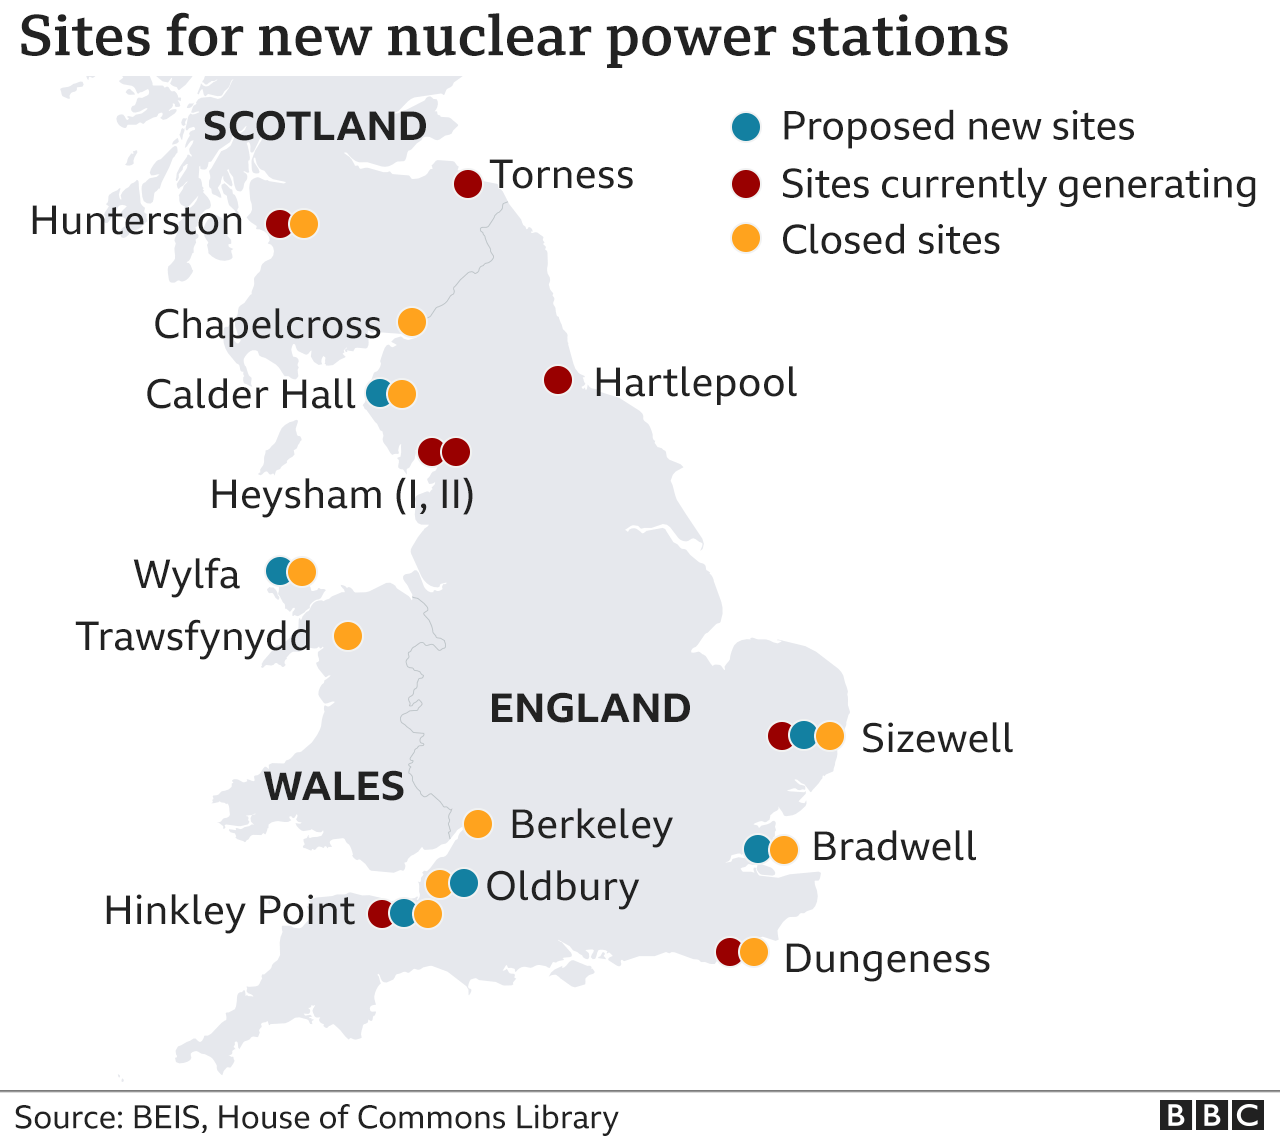 Sites for new nuclear power stations